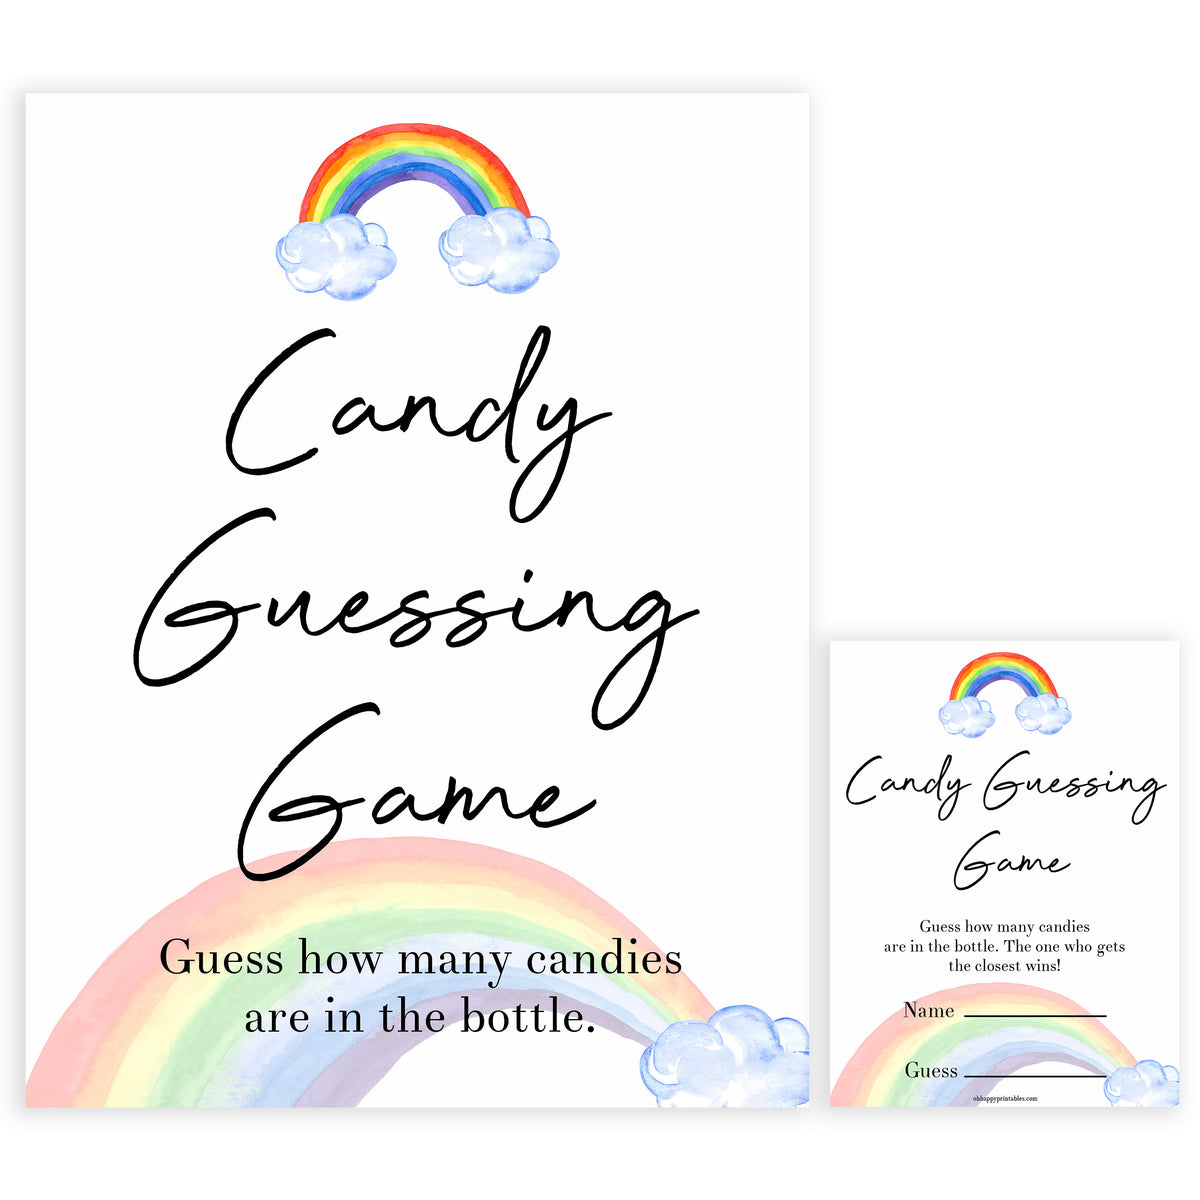 Rainbow baby games, rainbow candy guessing game, rainbow printable baby games, instant download games, rainbow baby shower, printable baby games, fun baby games, popular baby games, top 10 baby games